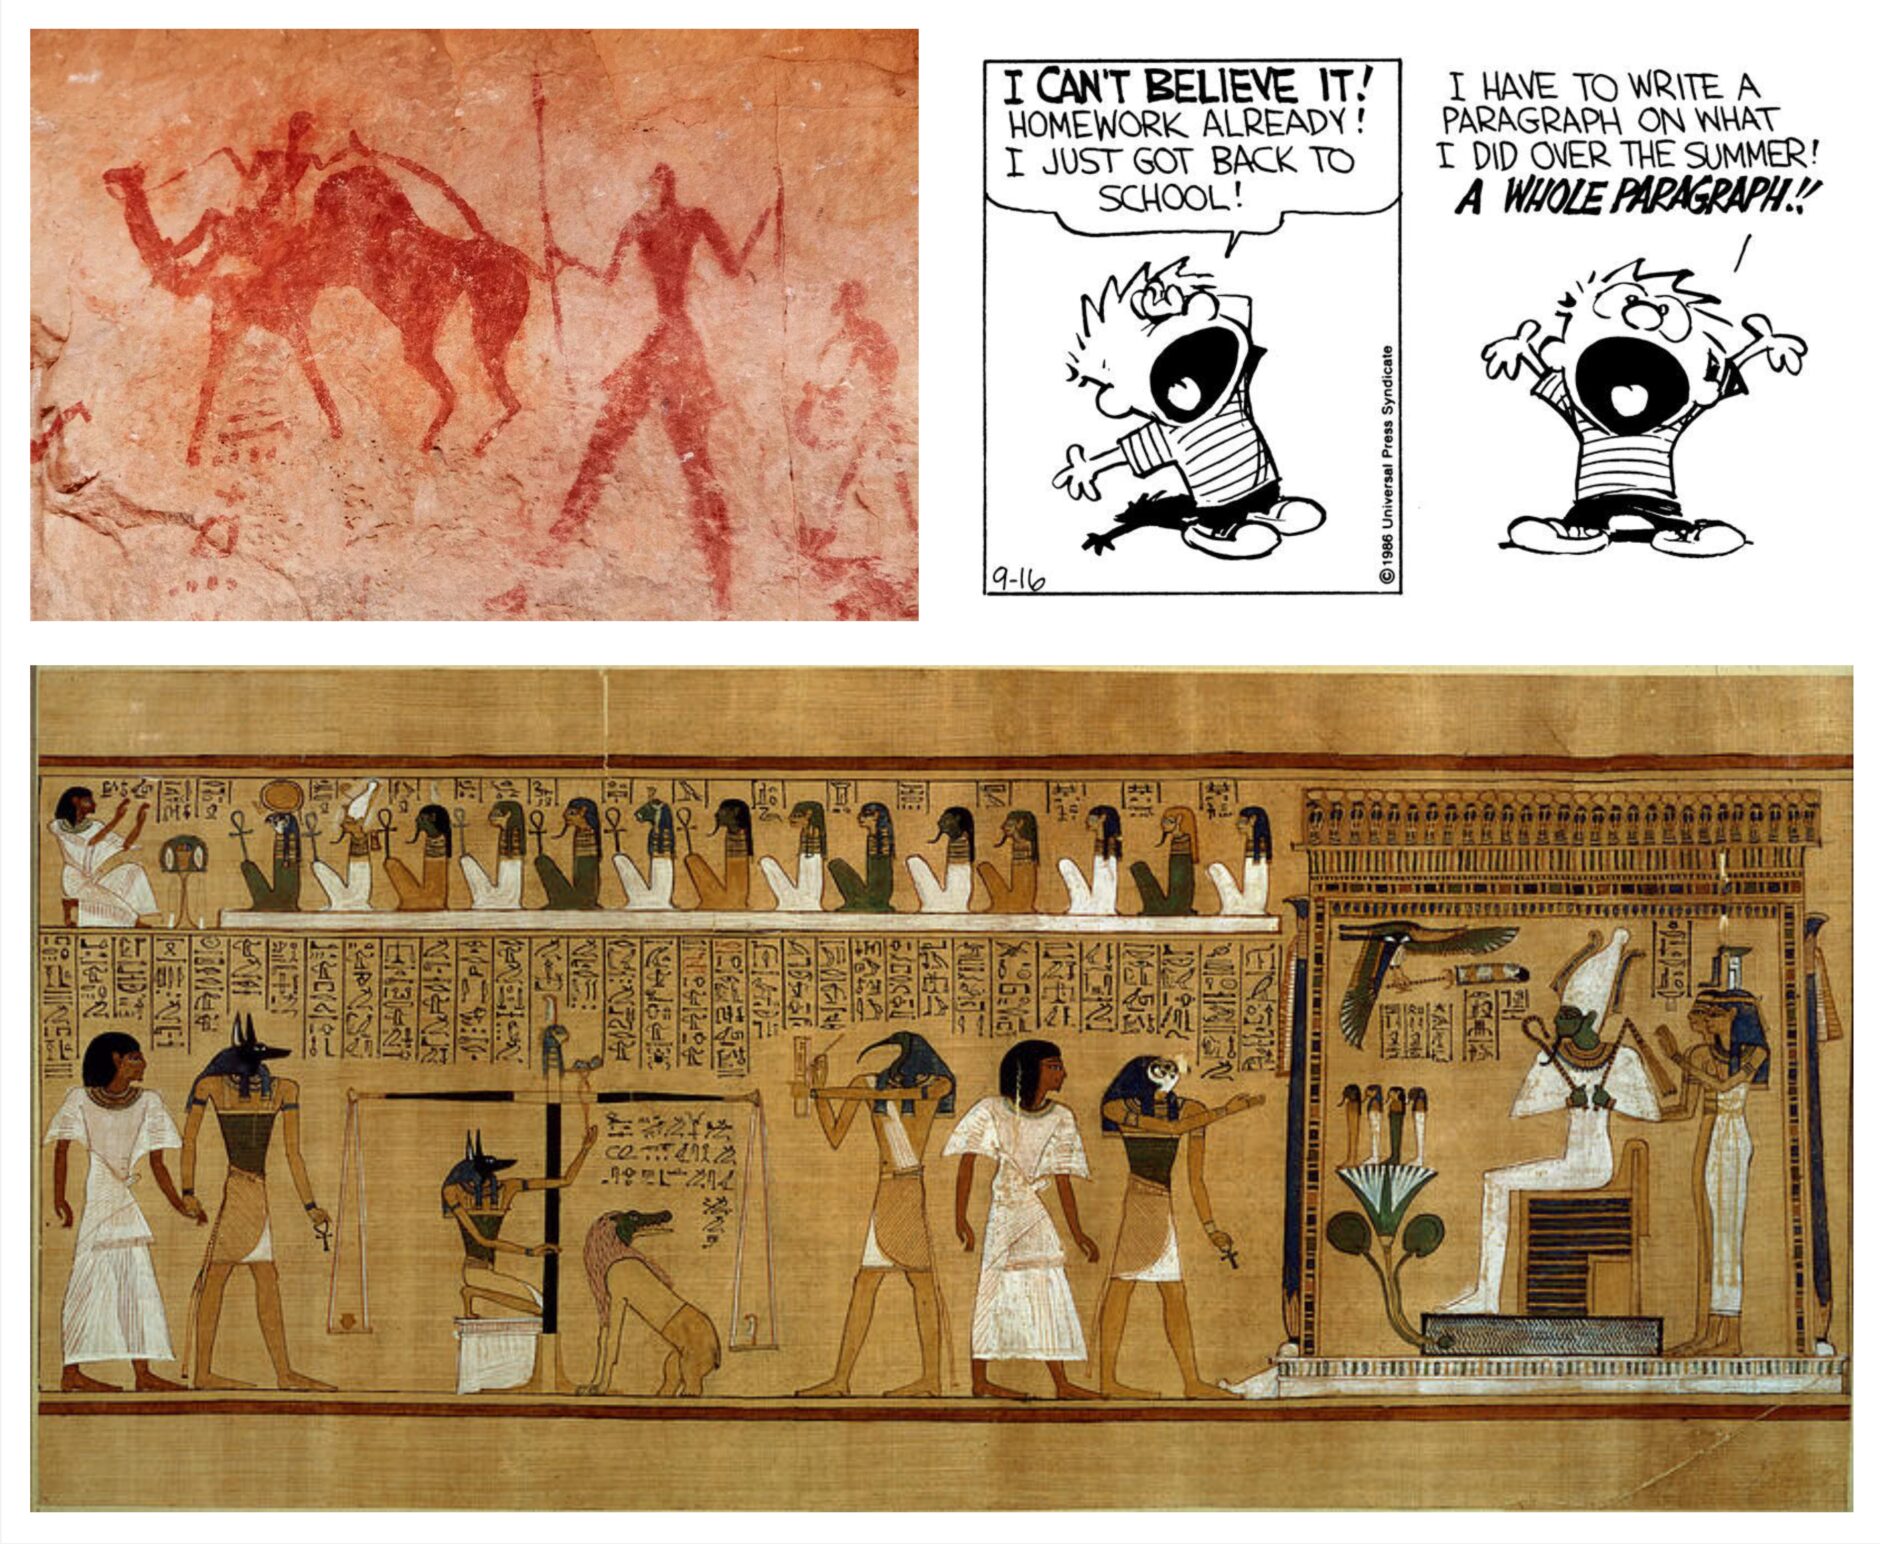 Collage of historical storytelling practices, including a cave painting, a Calvin and Hobbes cartoon, and hieroglyphic tales from ancient Egypt